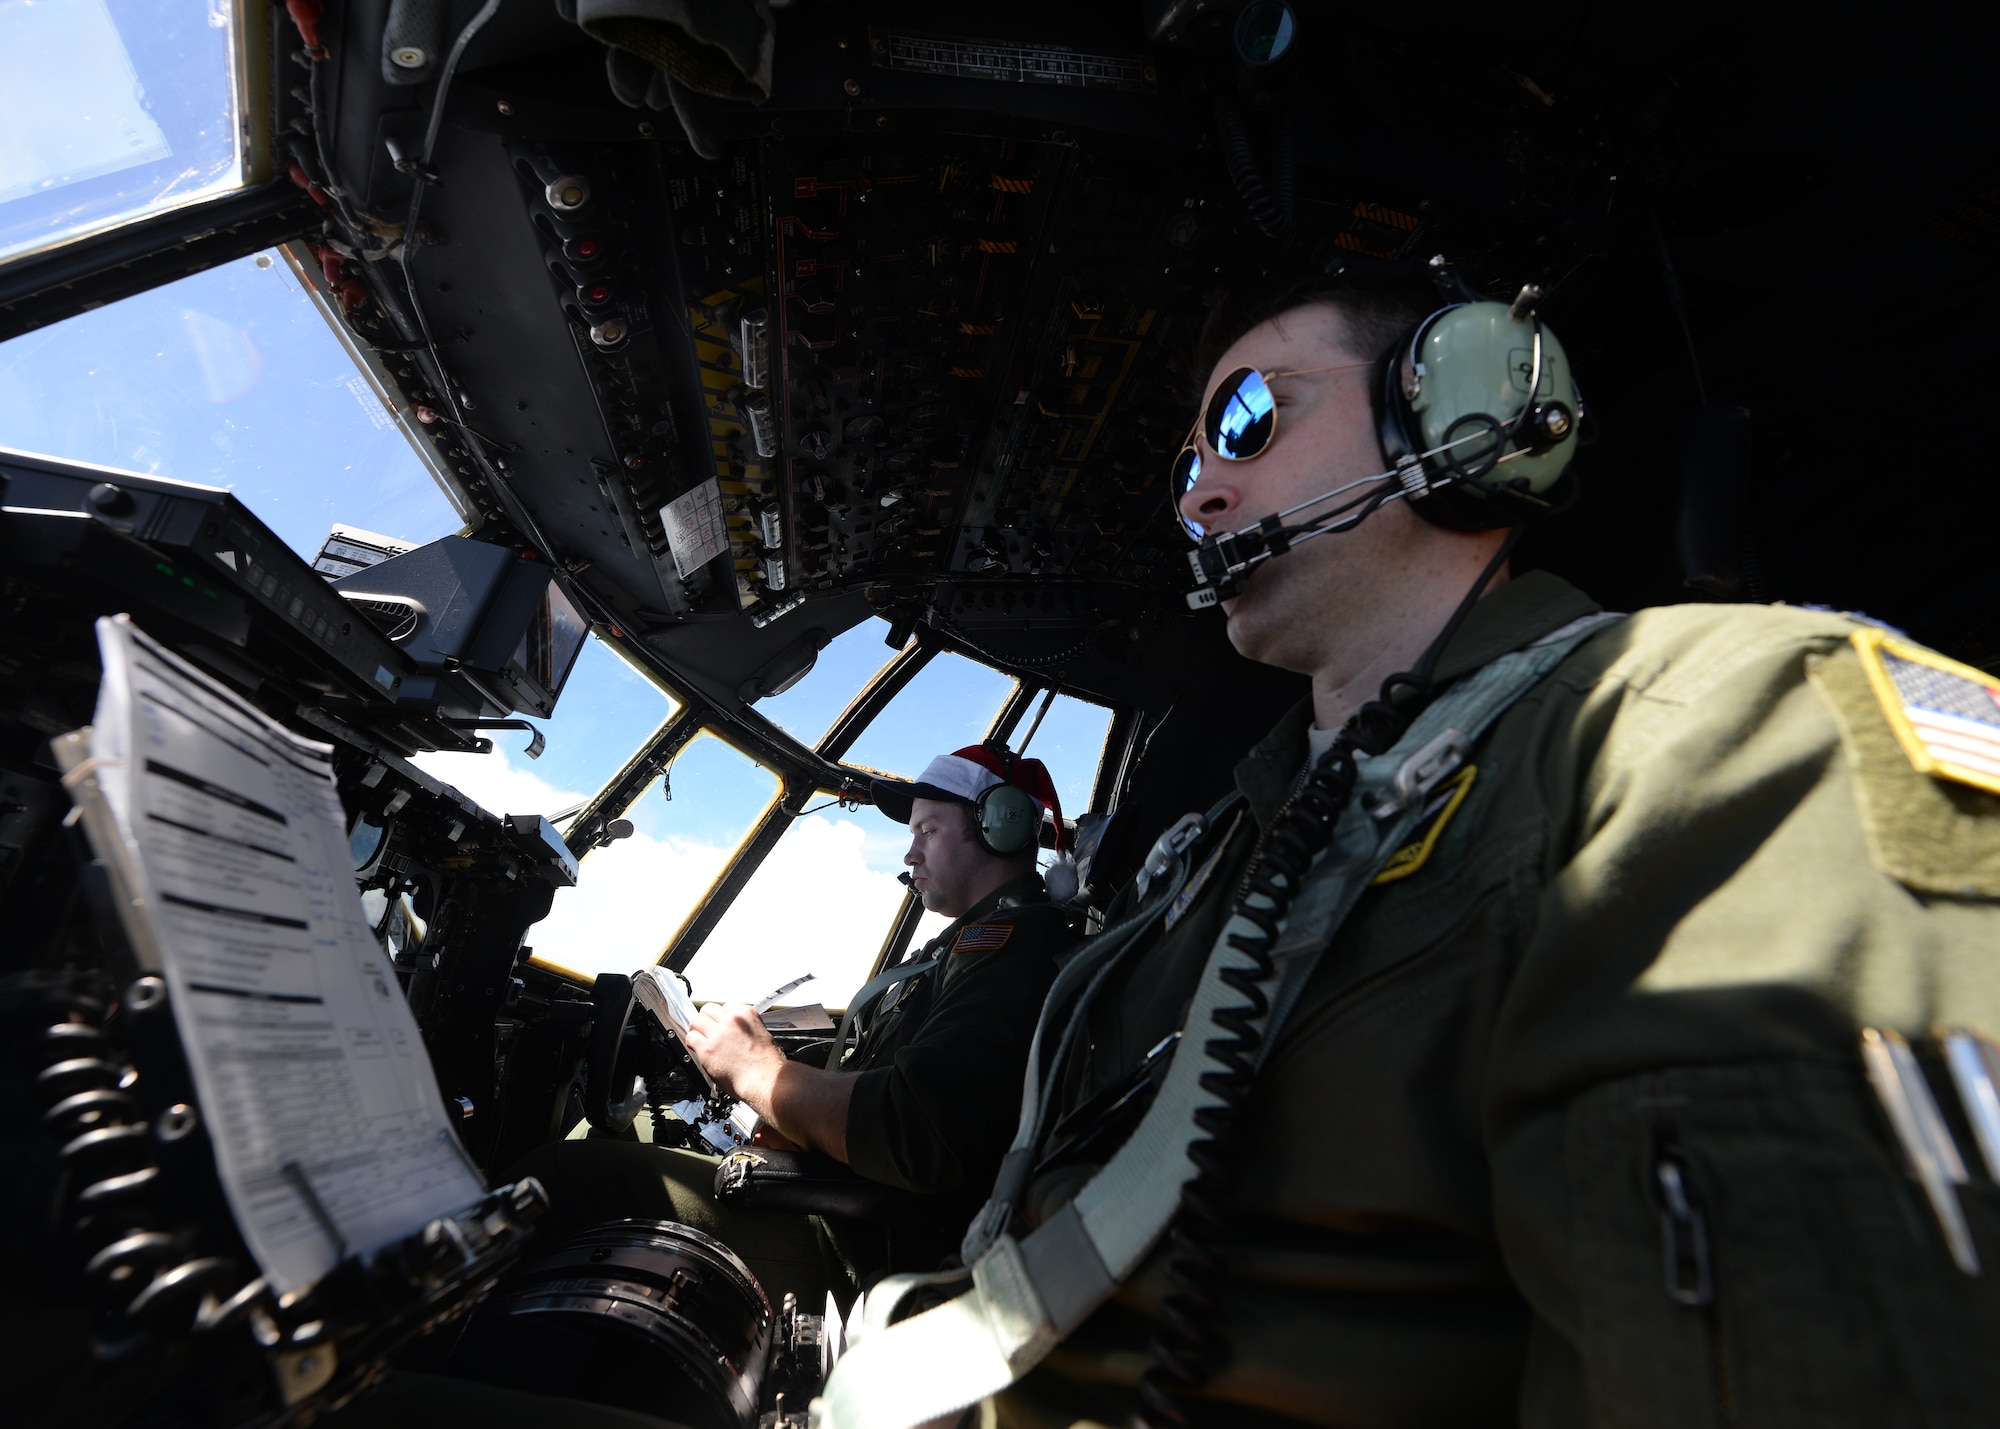 C-130 Hercules pilots from Yokota Air Base, Japan, looks out over the Pacific Ocean while on an Operation Christmas Drop flight Dec. 11, 2014. Operation Christmas Drop, which has occurred since 1952, is the world’s longest humanitarian airlift mission. Each year the operation supplies residents from more than 50 islands with boxes that contain donations to include non-perishable food items, clothing, medical supplies, tools, toys and other various items. (U.S. Air Force photo by Senior Airman Katrina M. Brisbin)